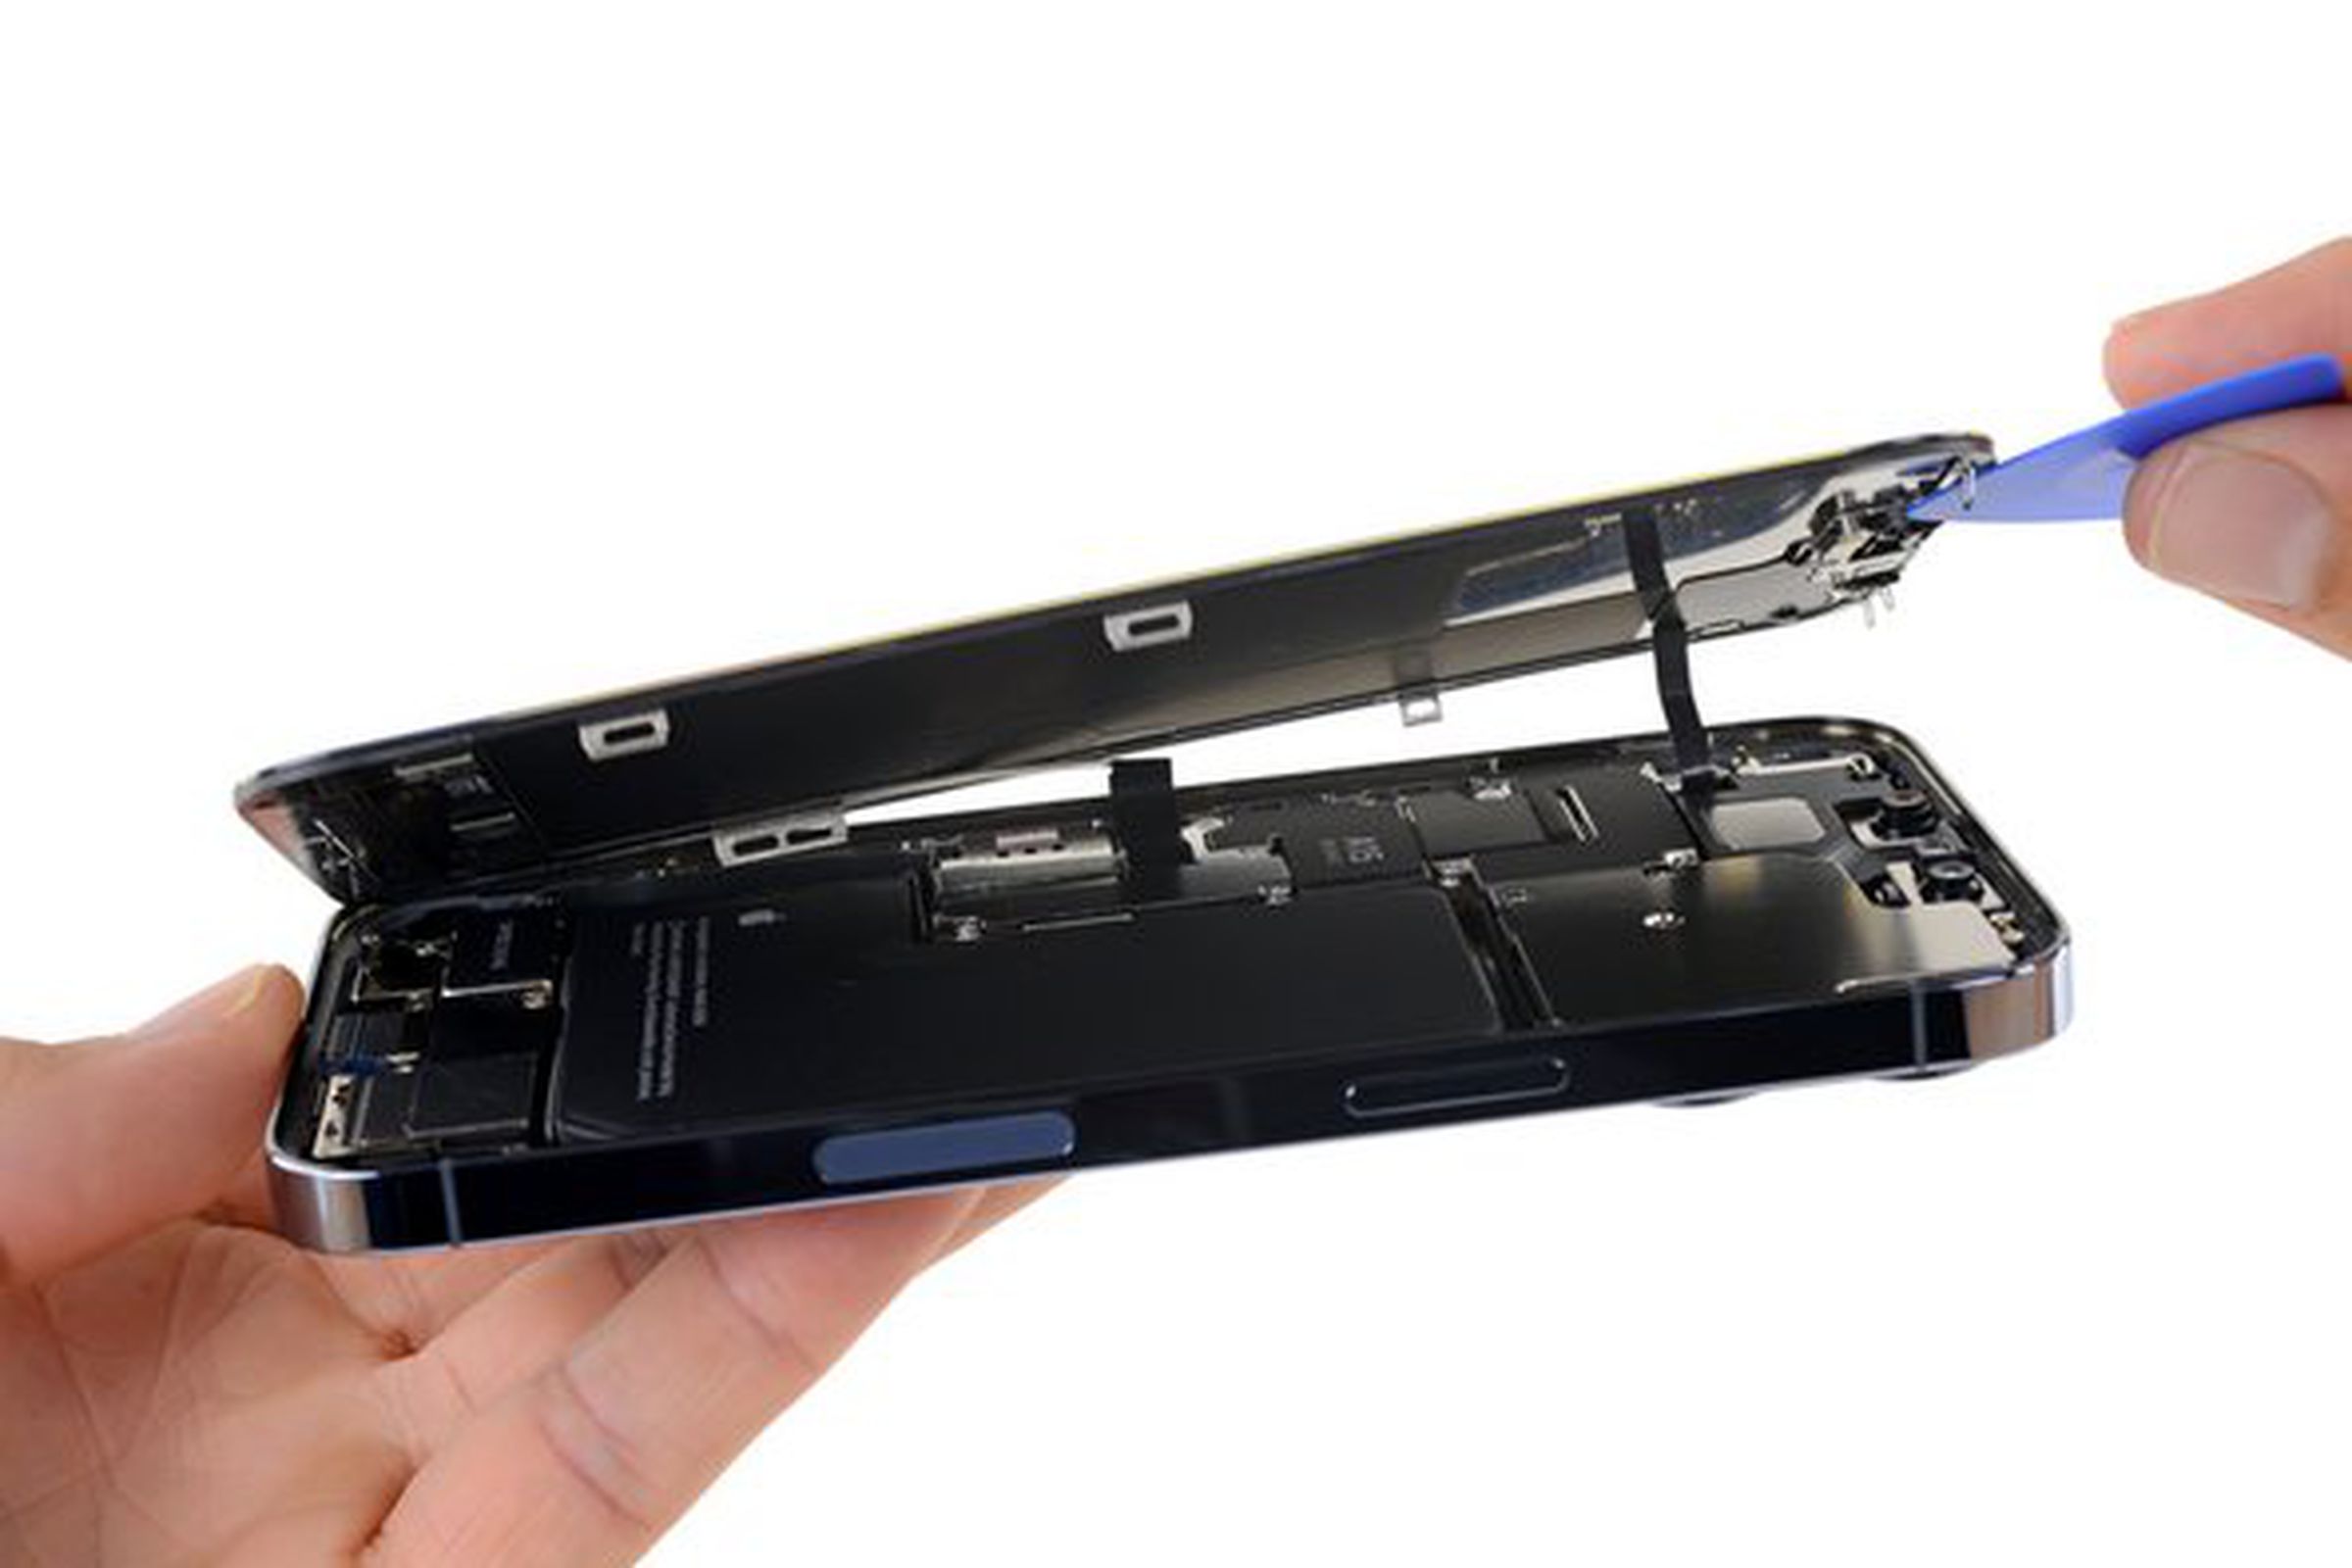 A repair tutorial from iFixit shows a user accessing the internal electronics of an iPhone